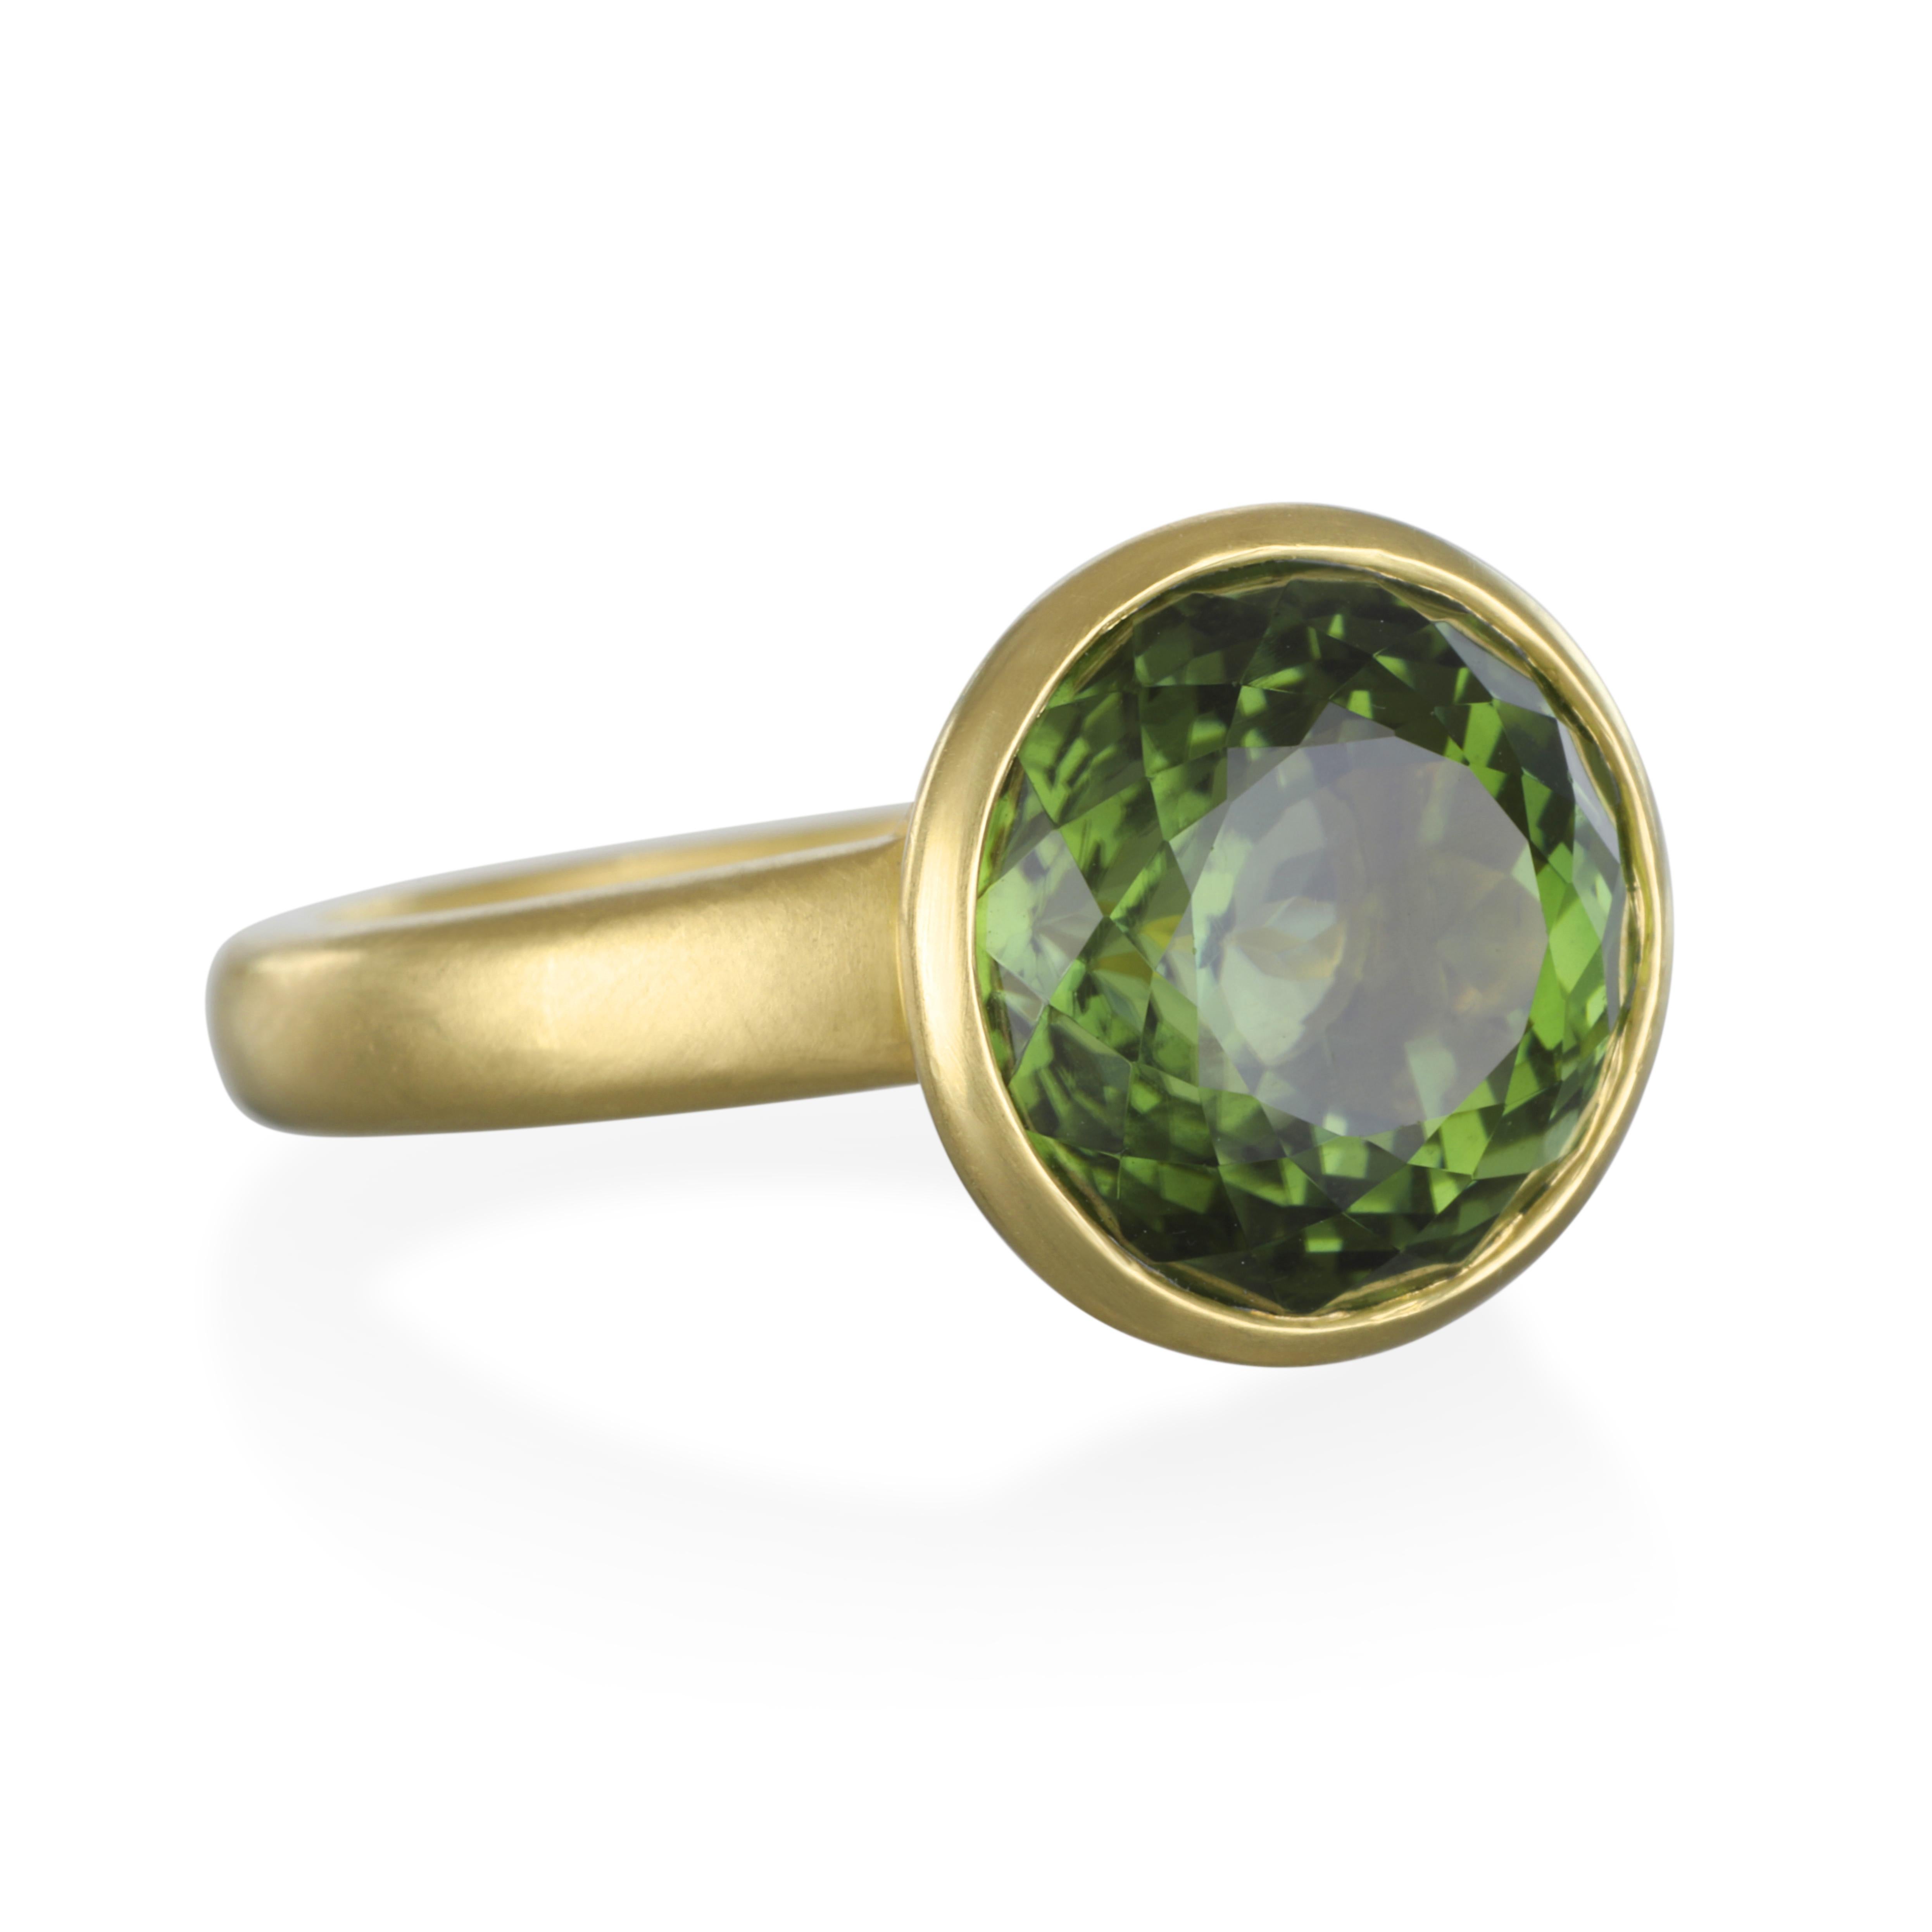 Portuguese Cut Green Round Tourmaline Ring in 18k Gold.
The rich green color and skillful Portuguese cut on this tourmaline combine elegantly in this simple and clean design. The term Portuguese cut refers to the extra row of facets that can be seen